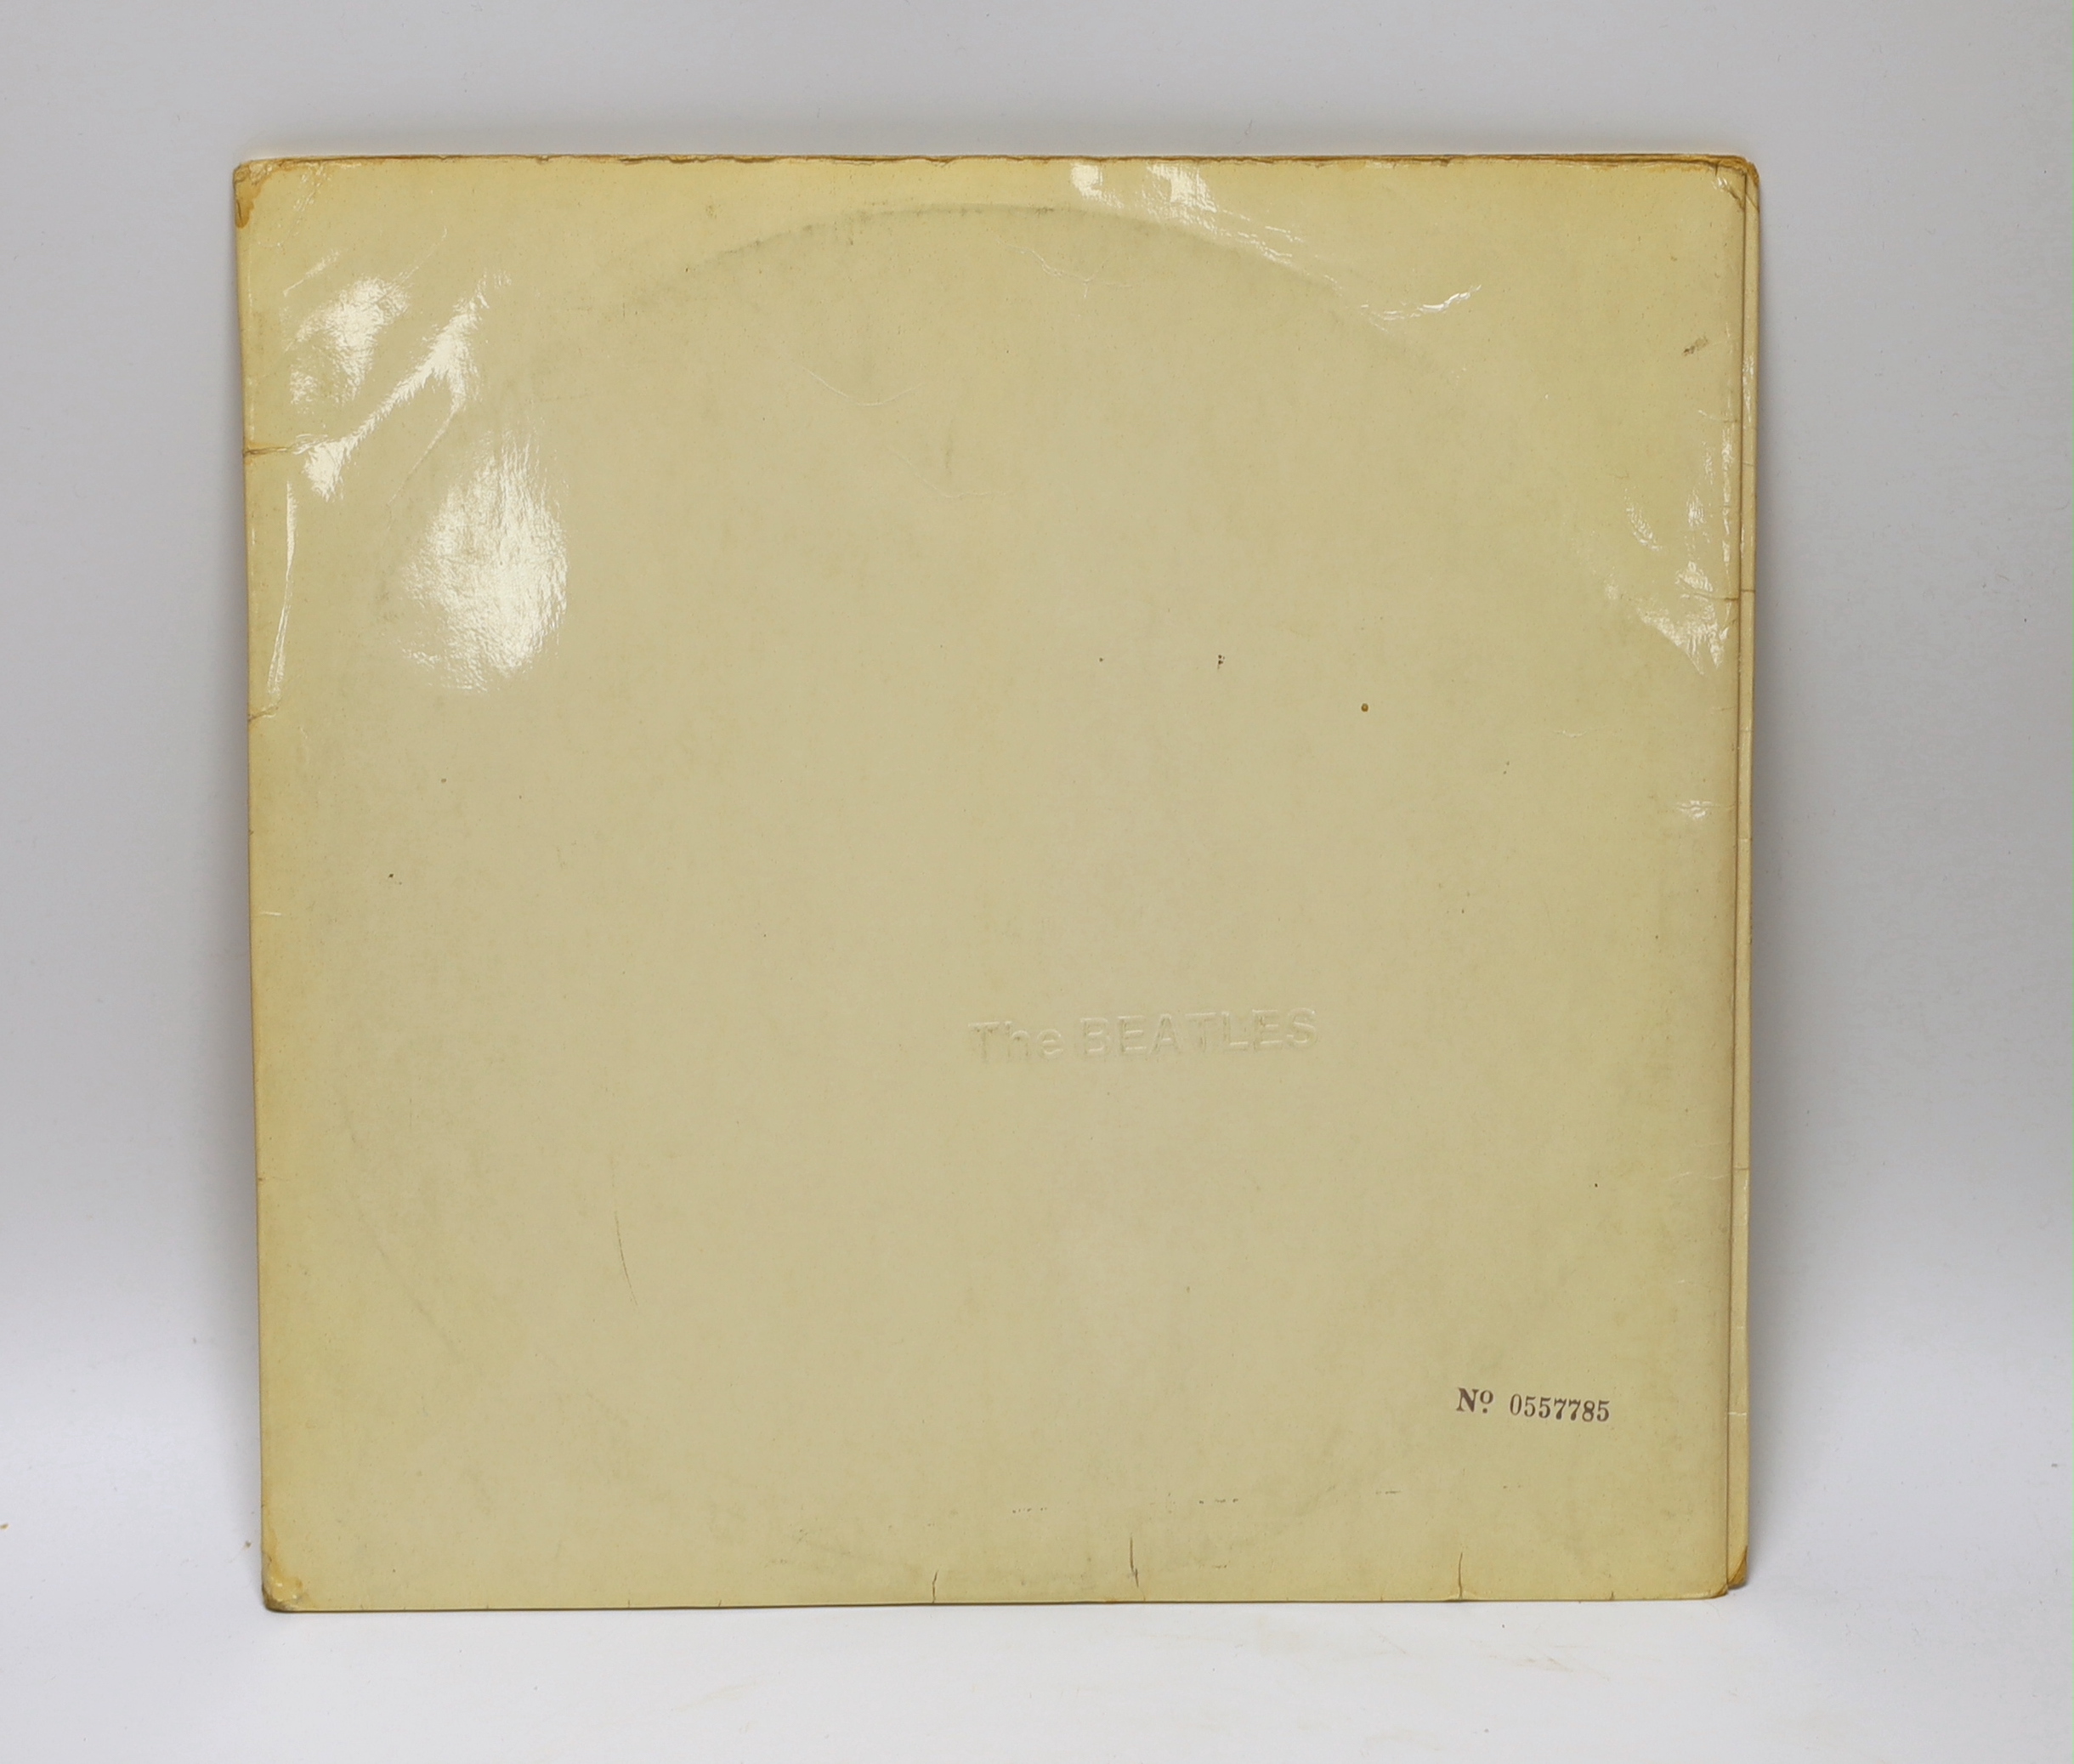 The Beatles; The White Album, top opening cover numbered 0557785, two LPs with set of four photographs and booklet, missing inner sleeves